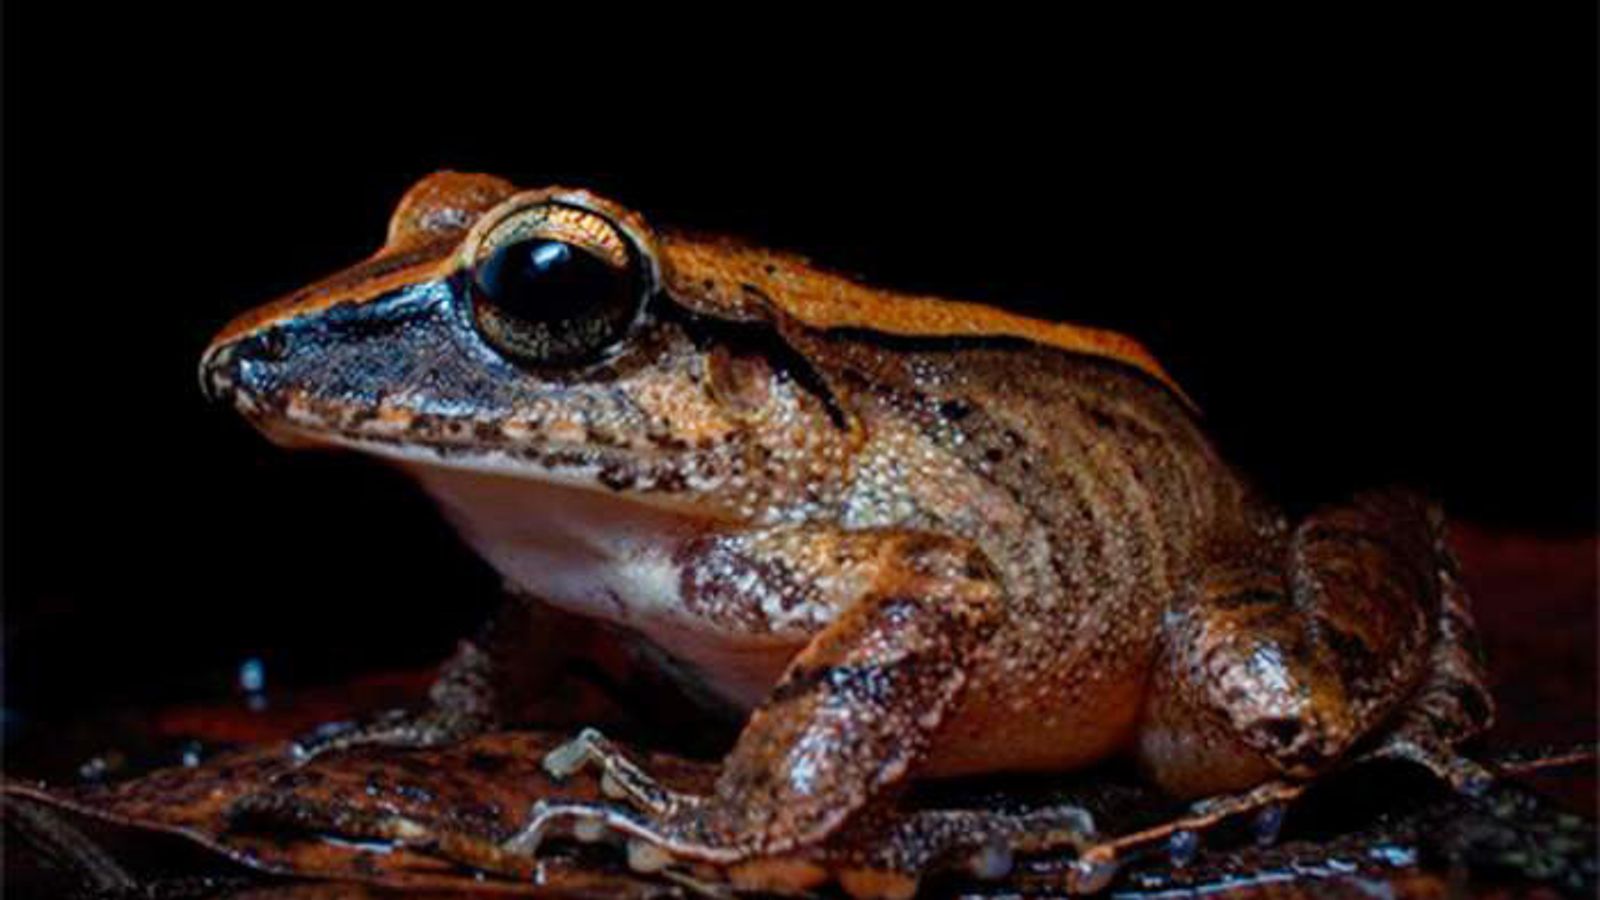 Scientists in Brazil discover that frogs are screaming, but humans cannot hear them